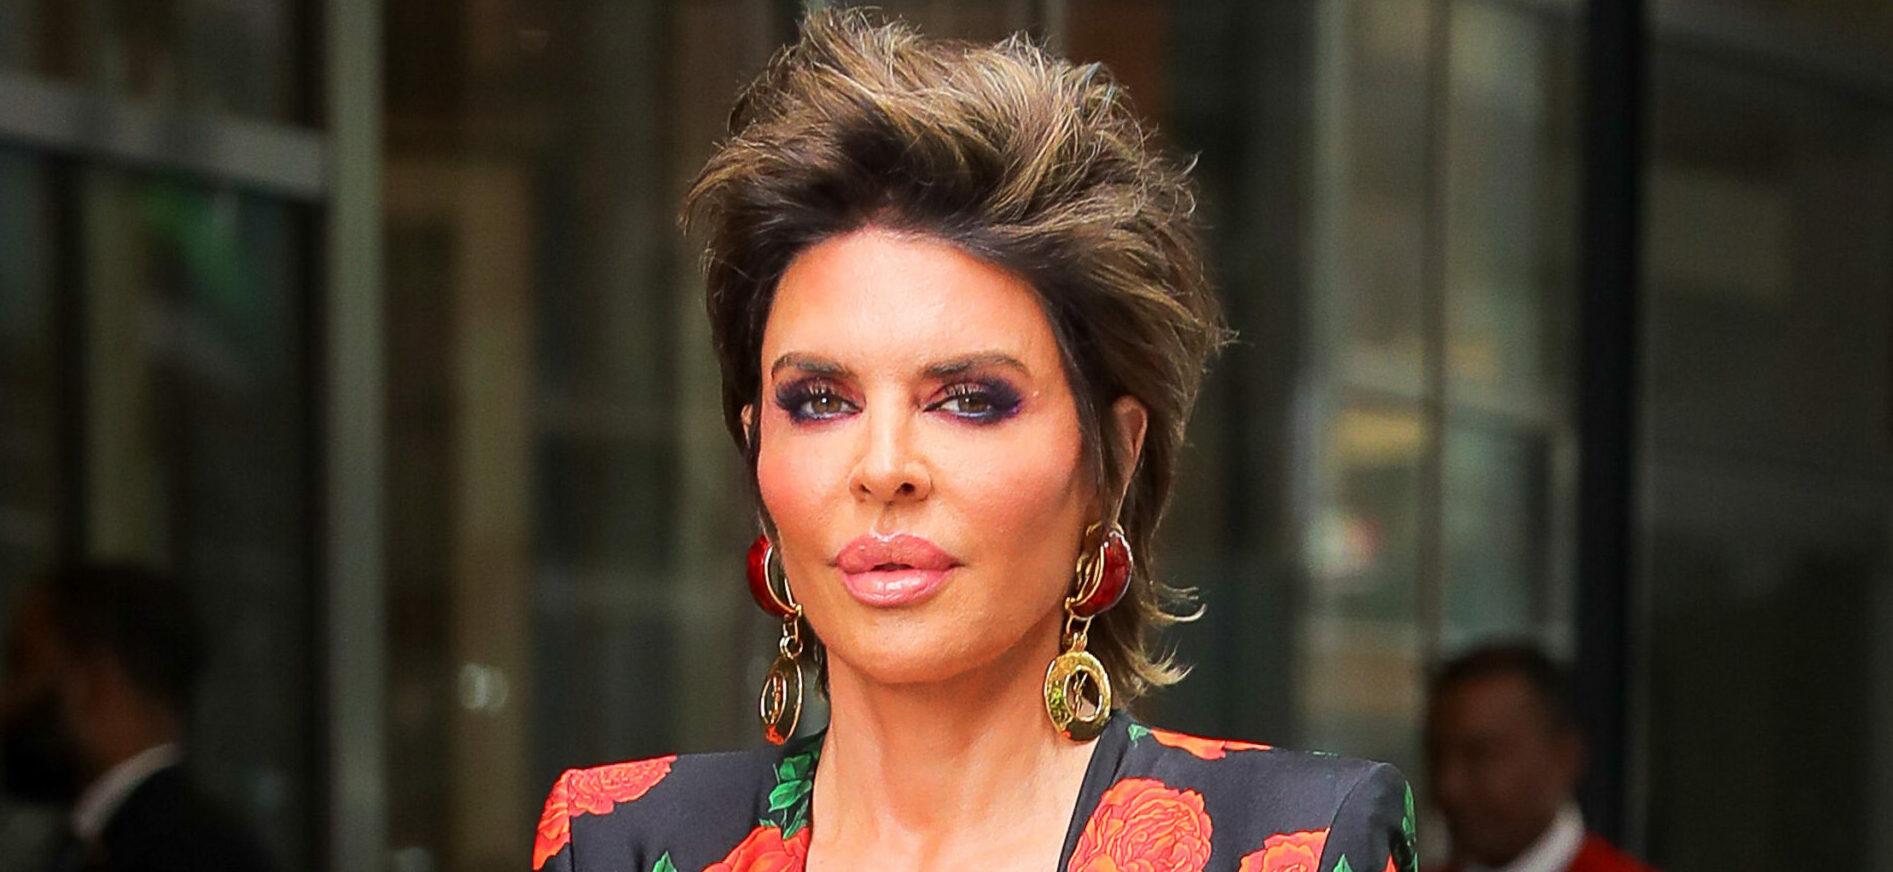 Lisa Rinna wore a rose-print YSL catsuit as leaving her hotel in New York City